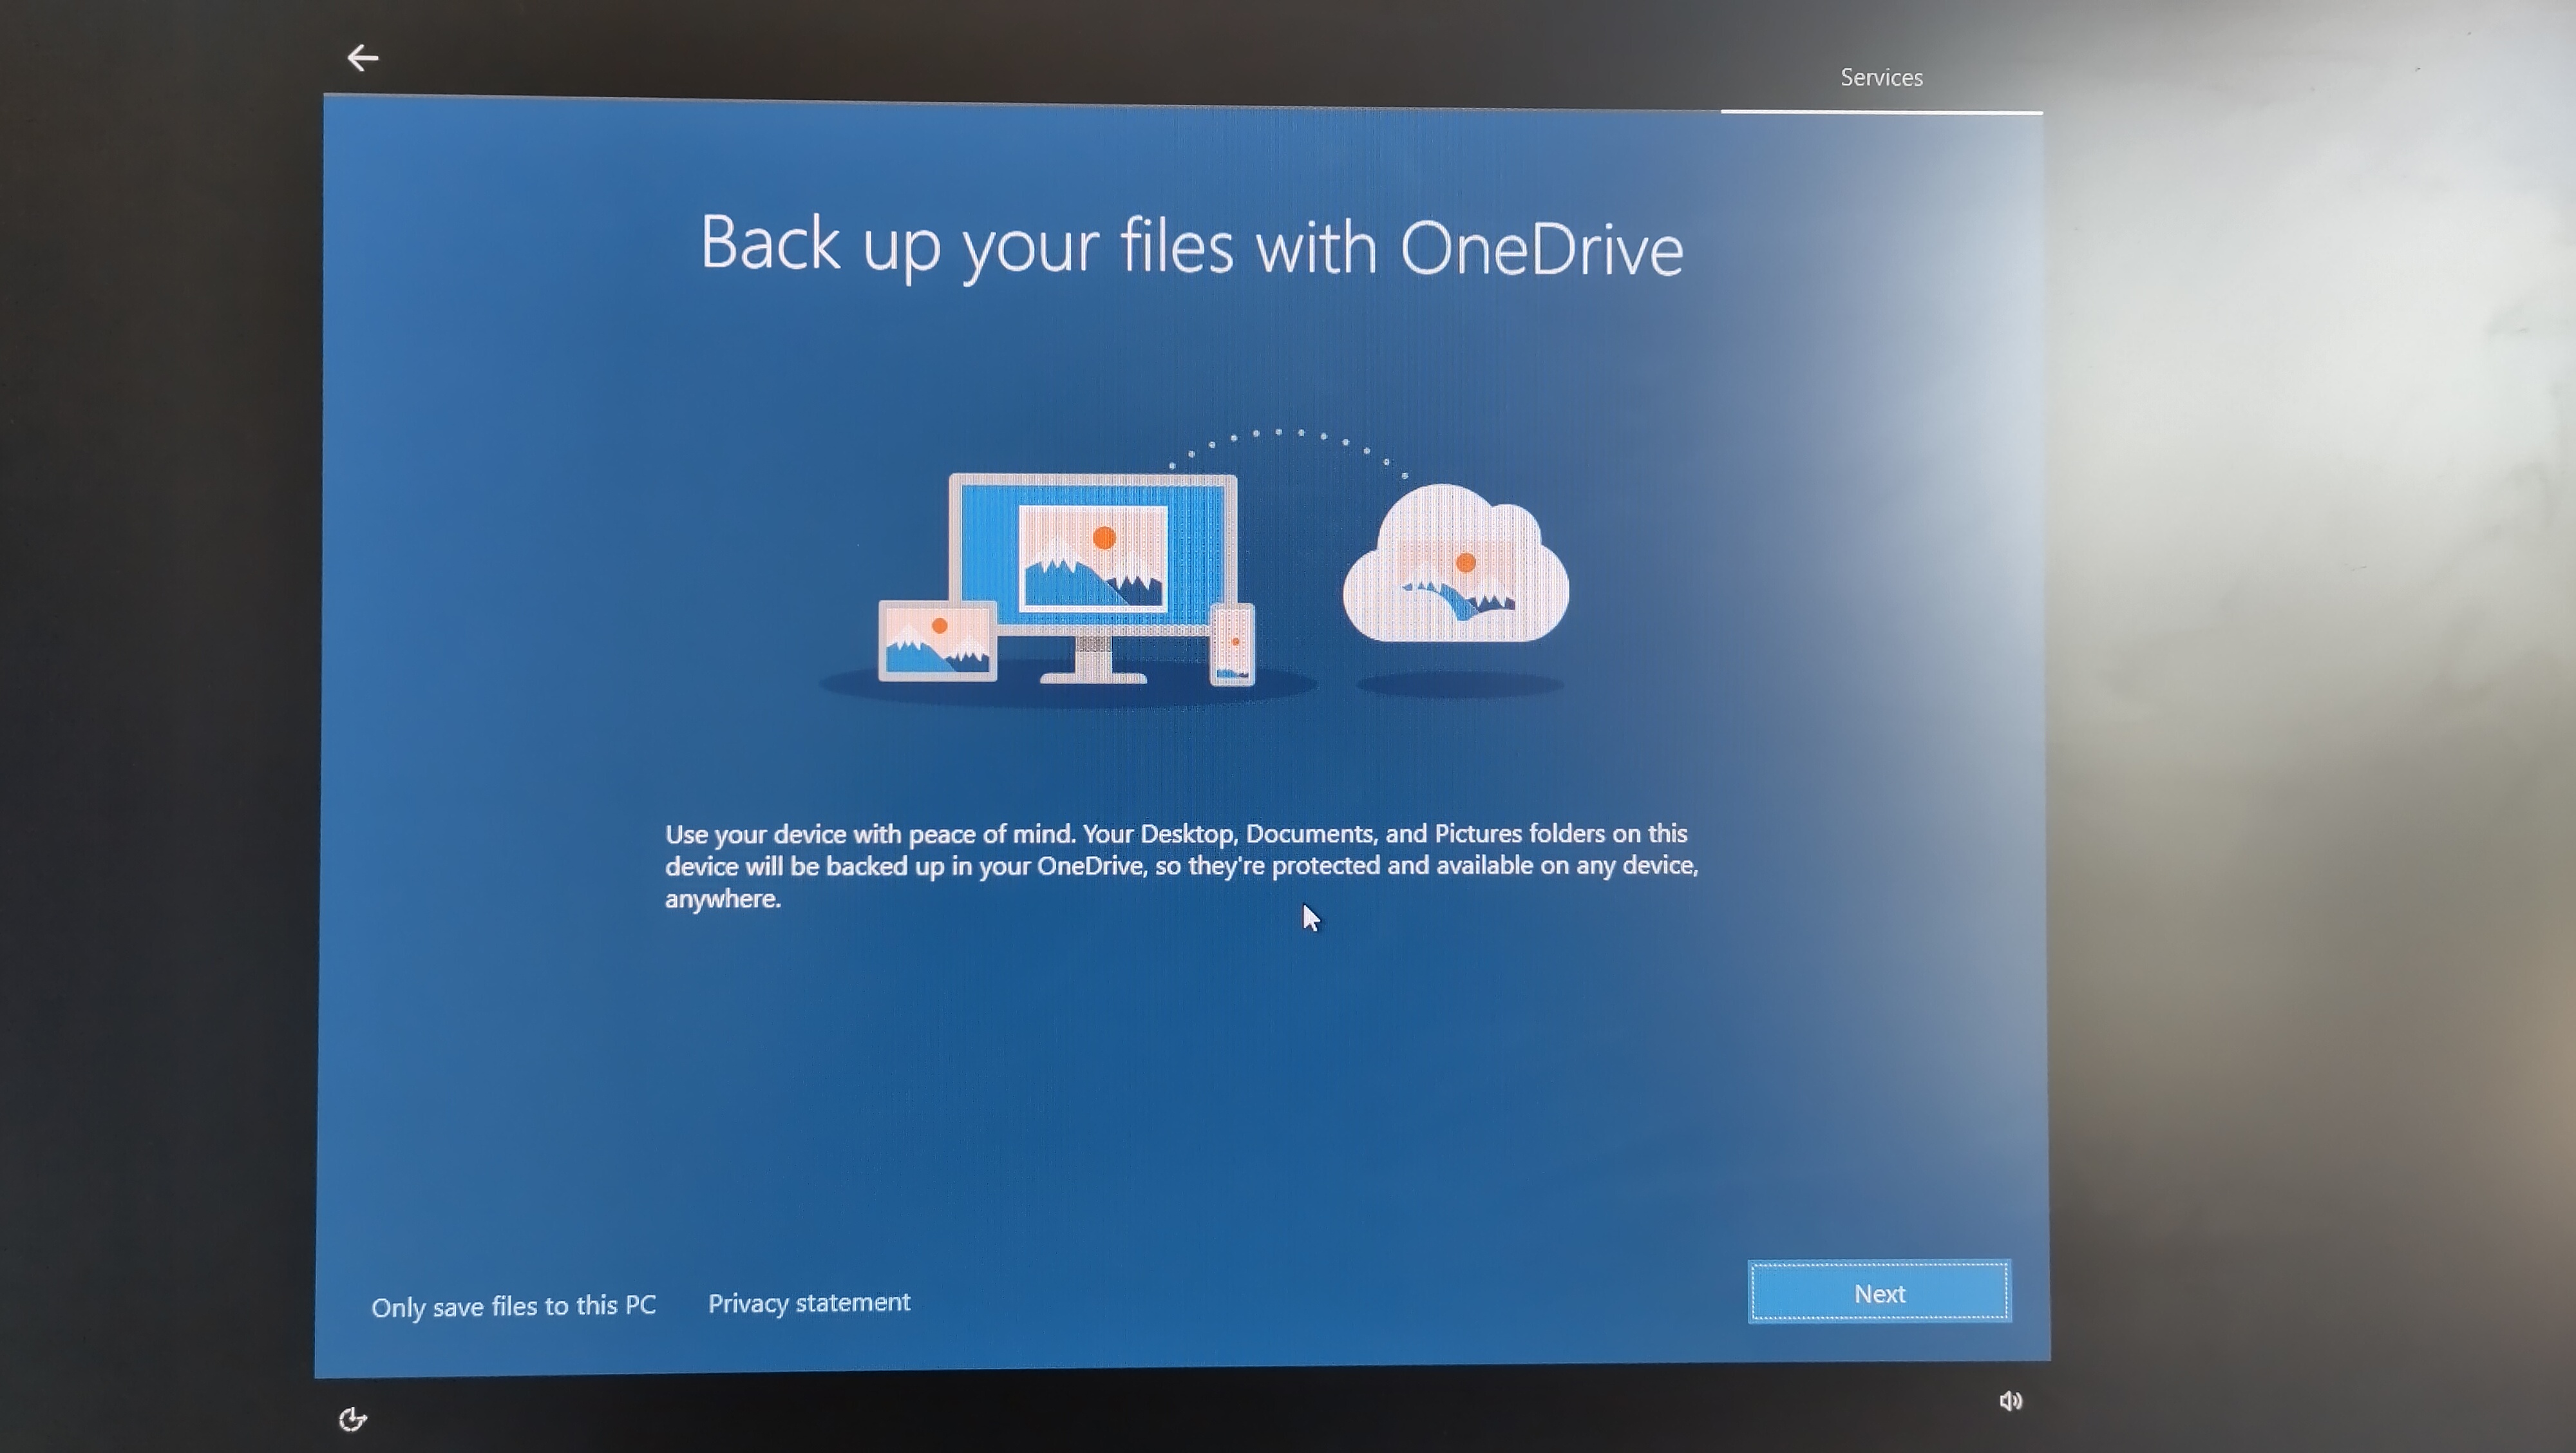 Back up your files with OneDrive